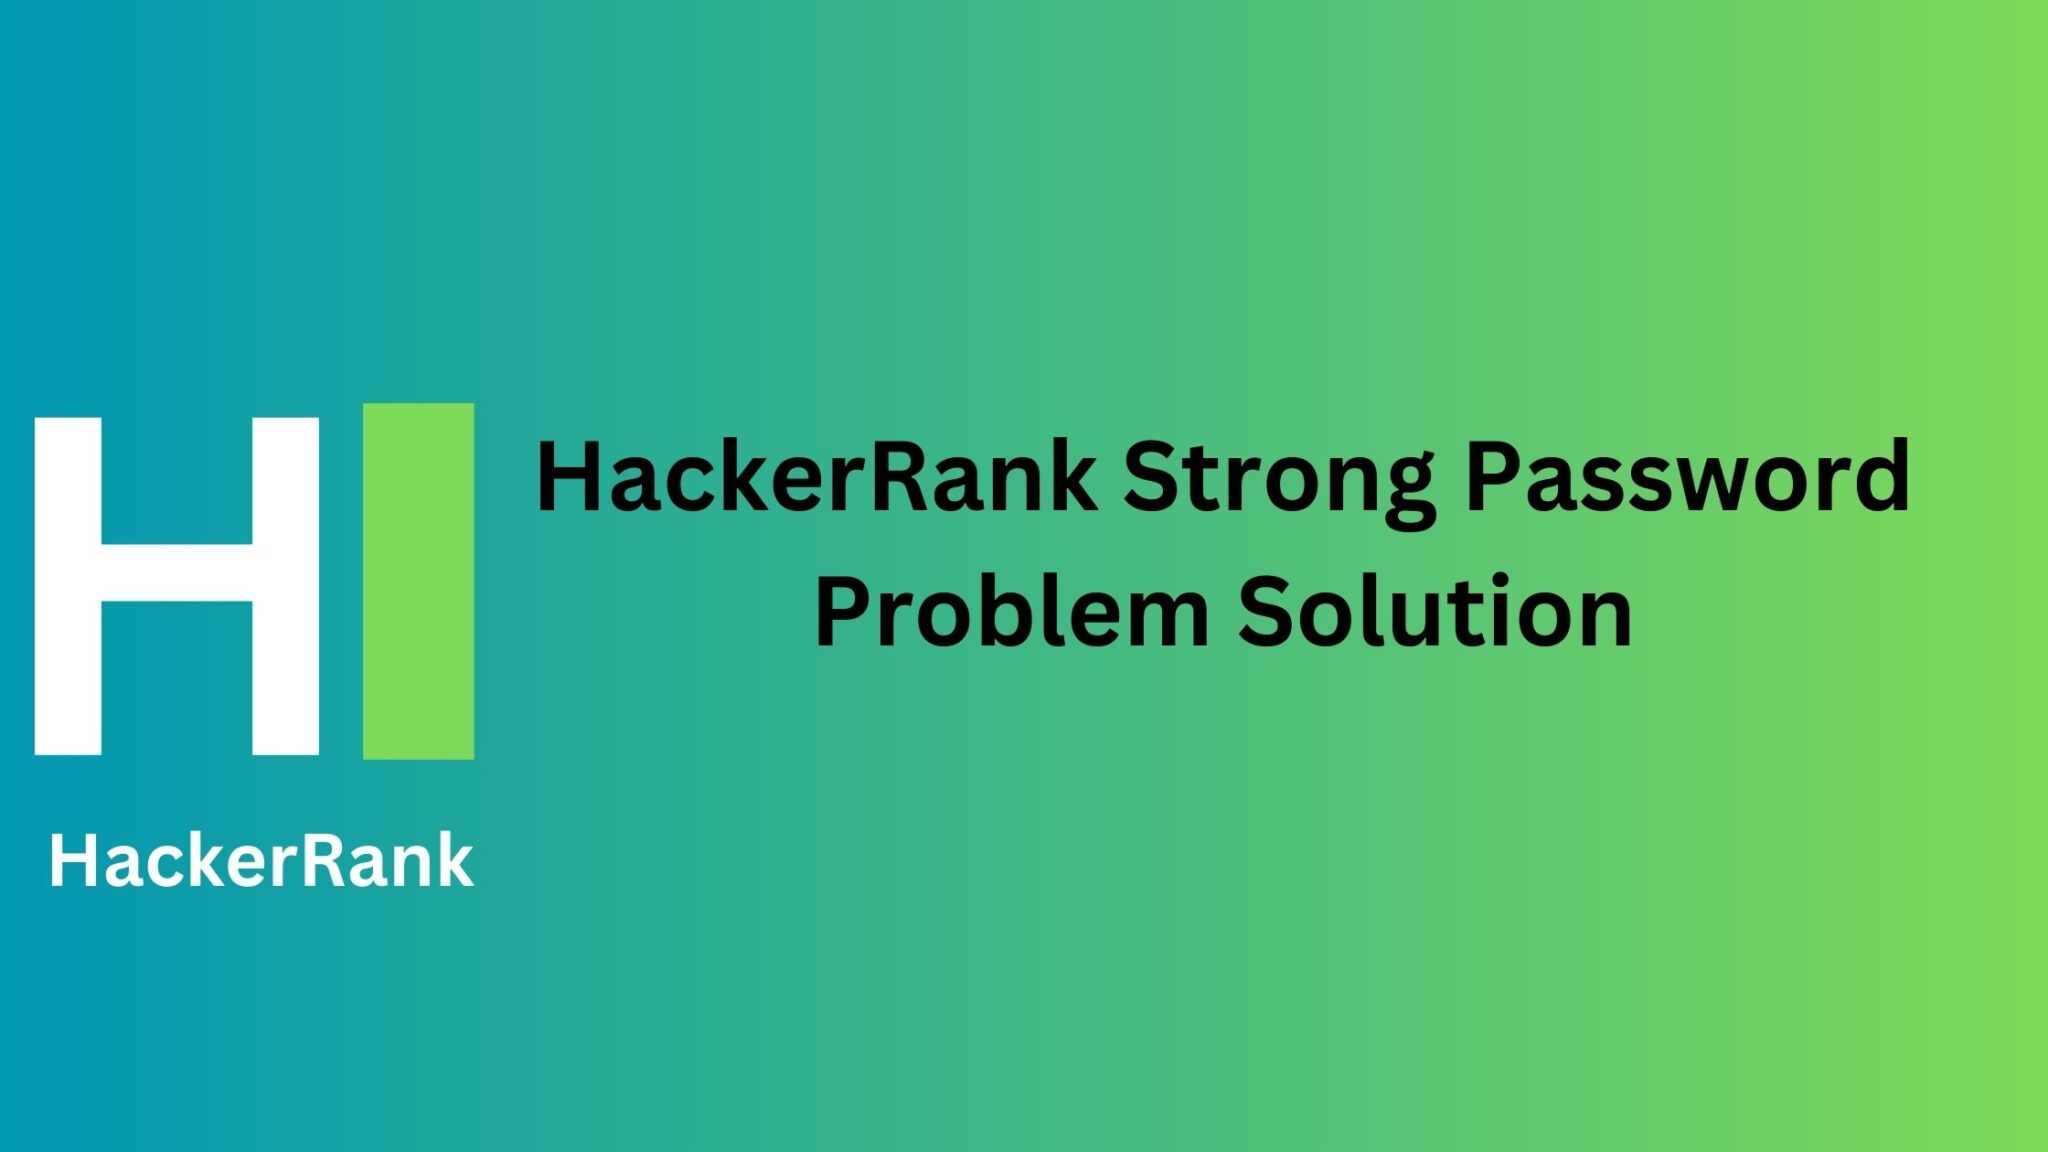 hackerrank-strong-password-problem-solution-thecscience